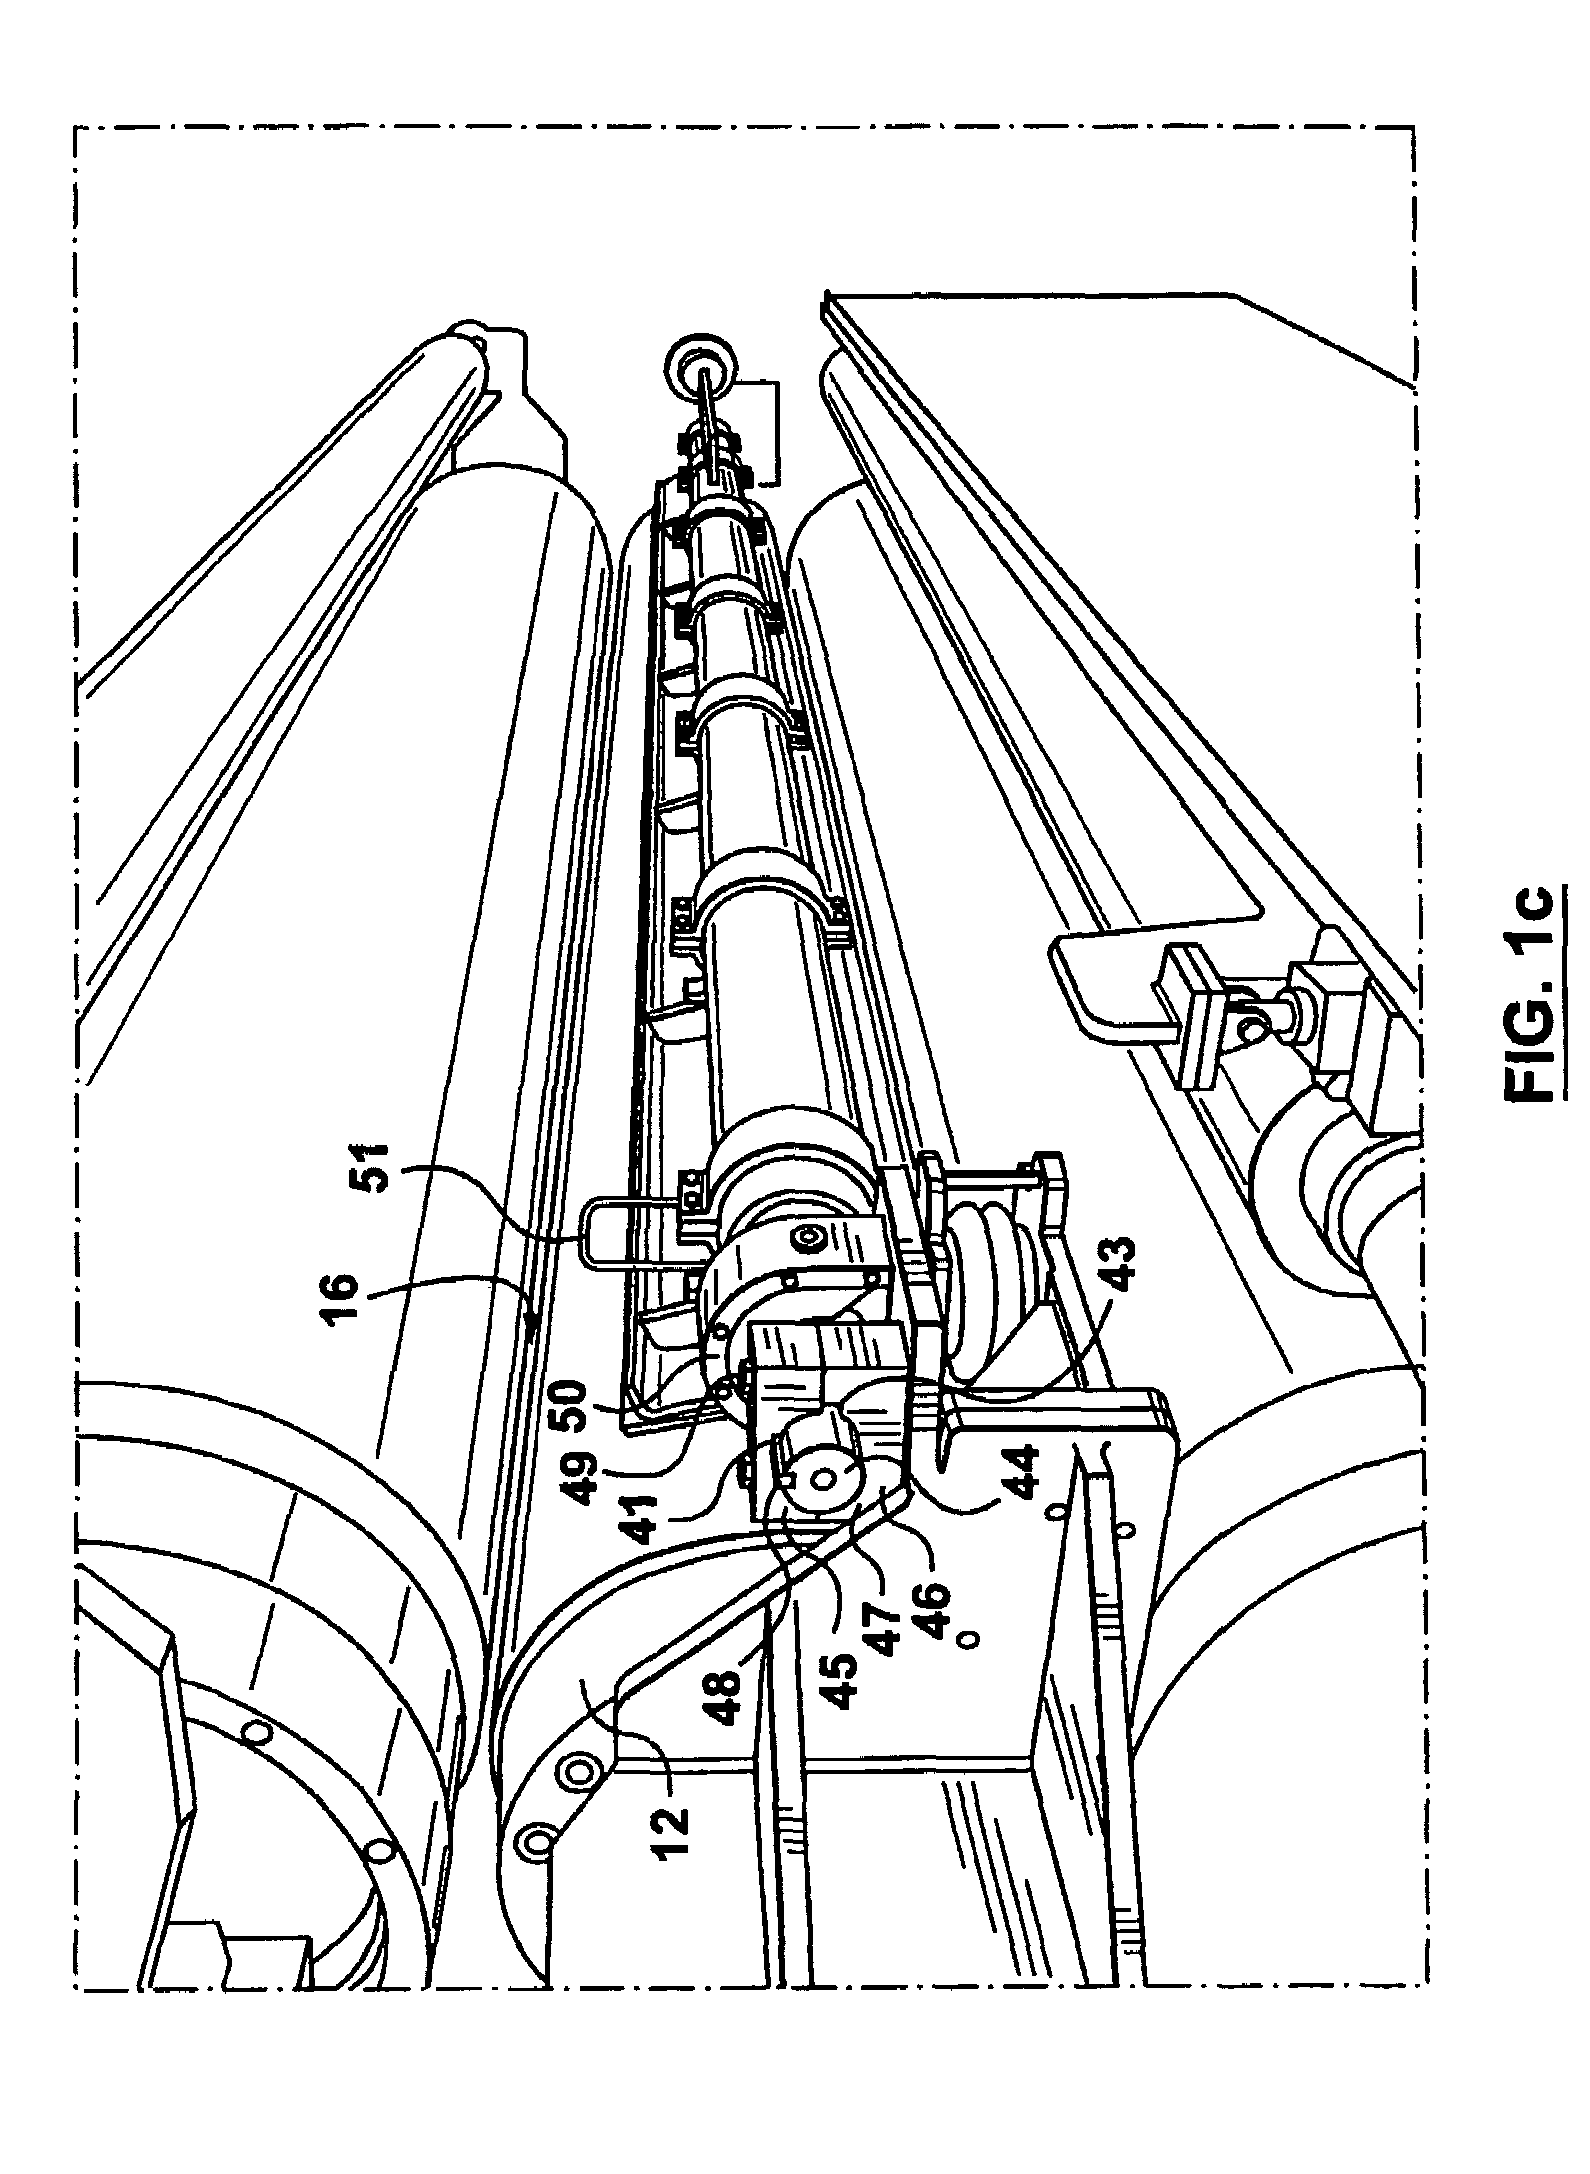 Roll cleaning apparatus